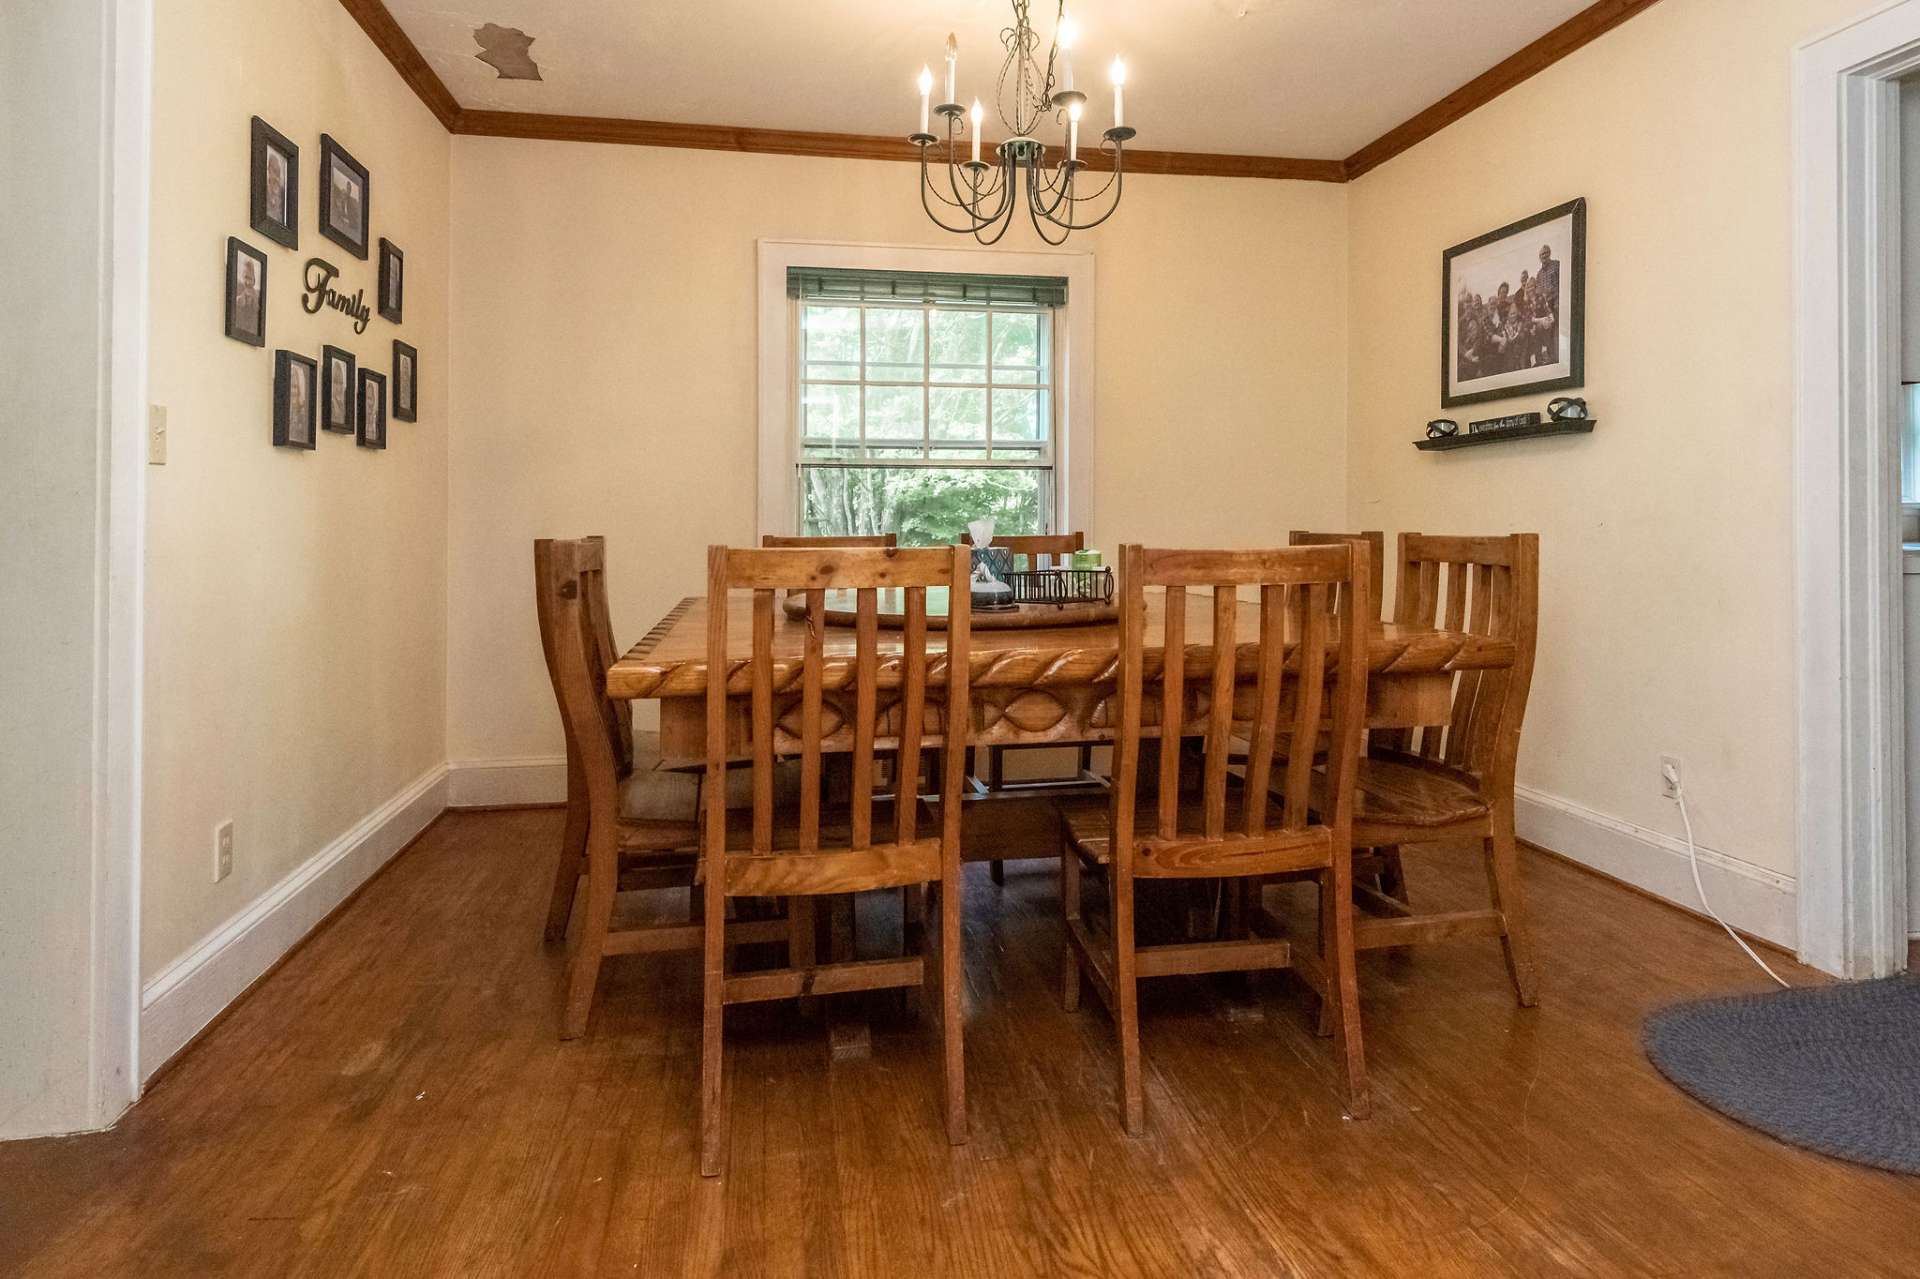 Dining off of the kitchen with space for family and guests.